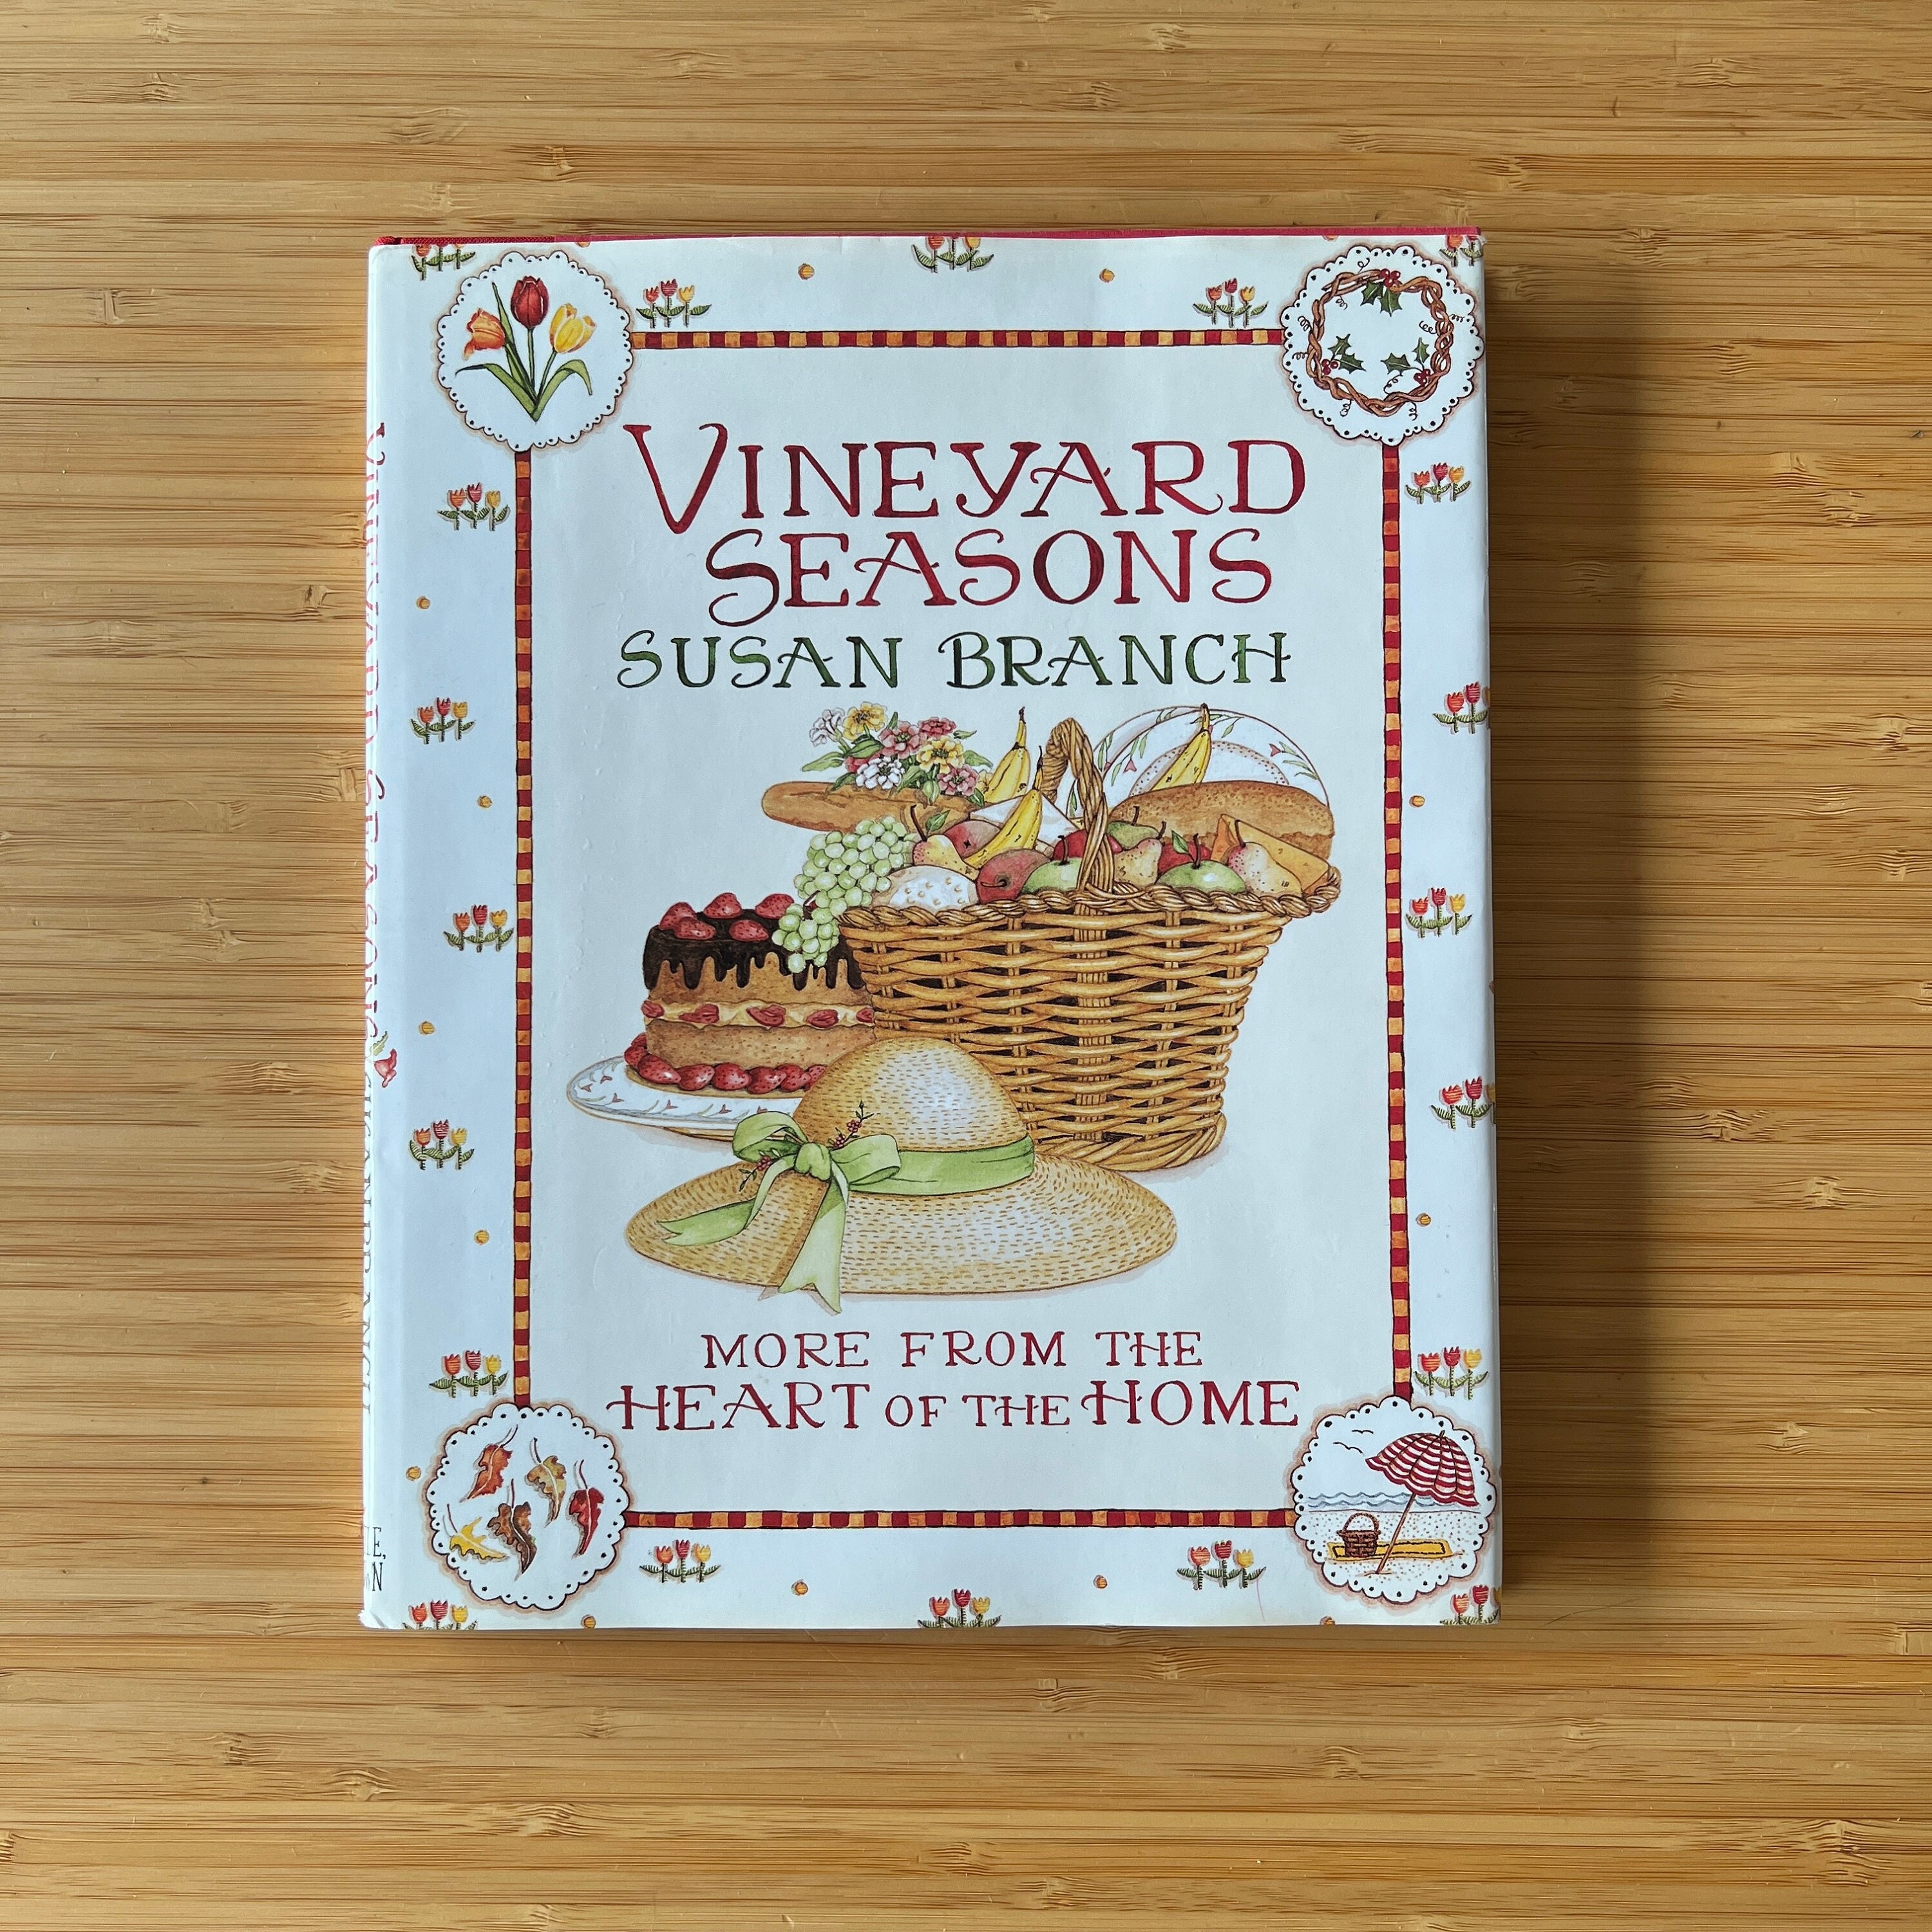 Vineyard Seasons by Susan Branch, Heart of the Home, Illustrated